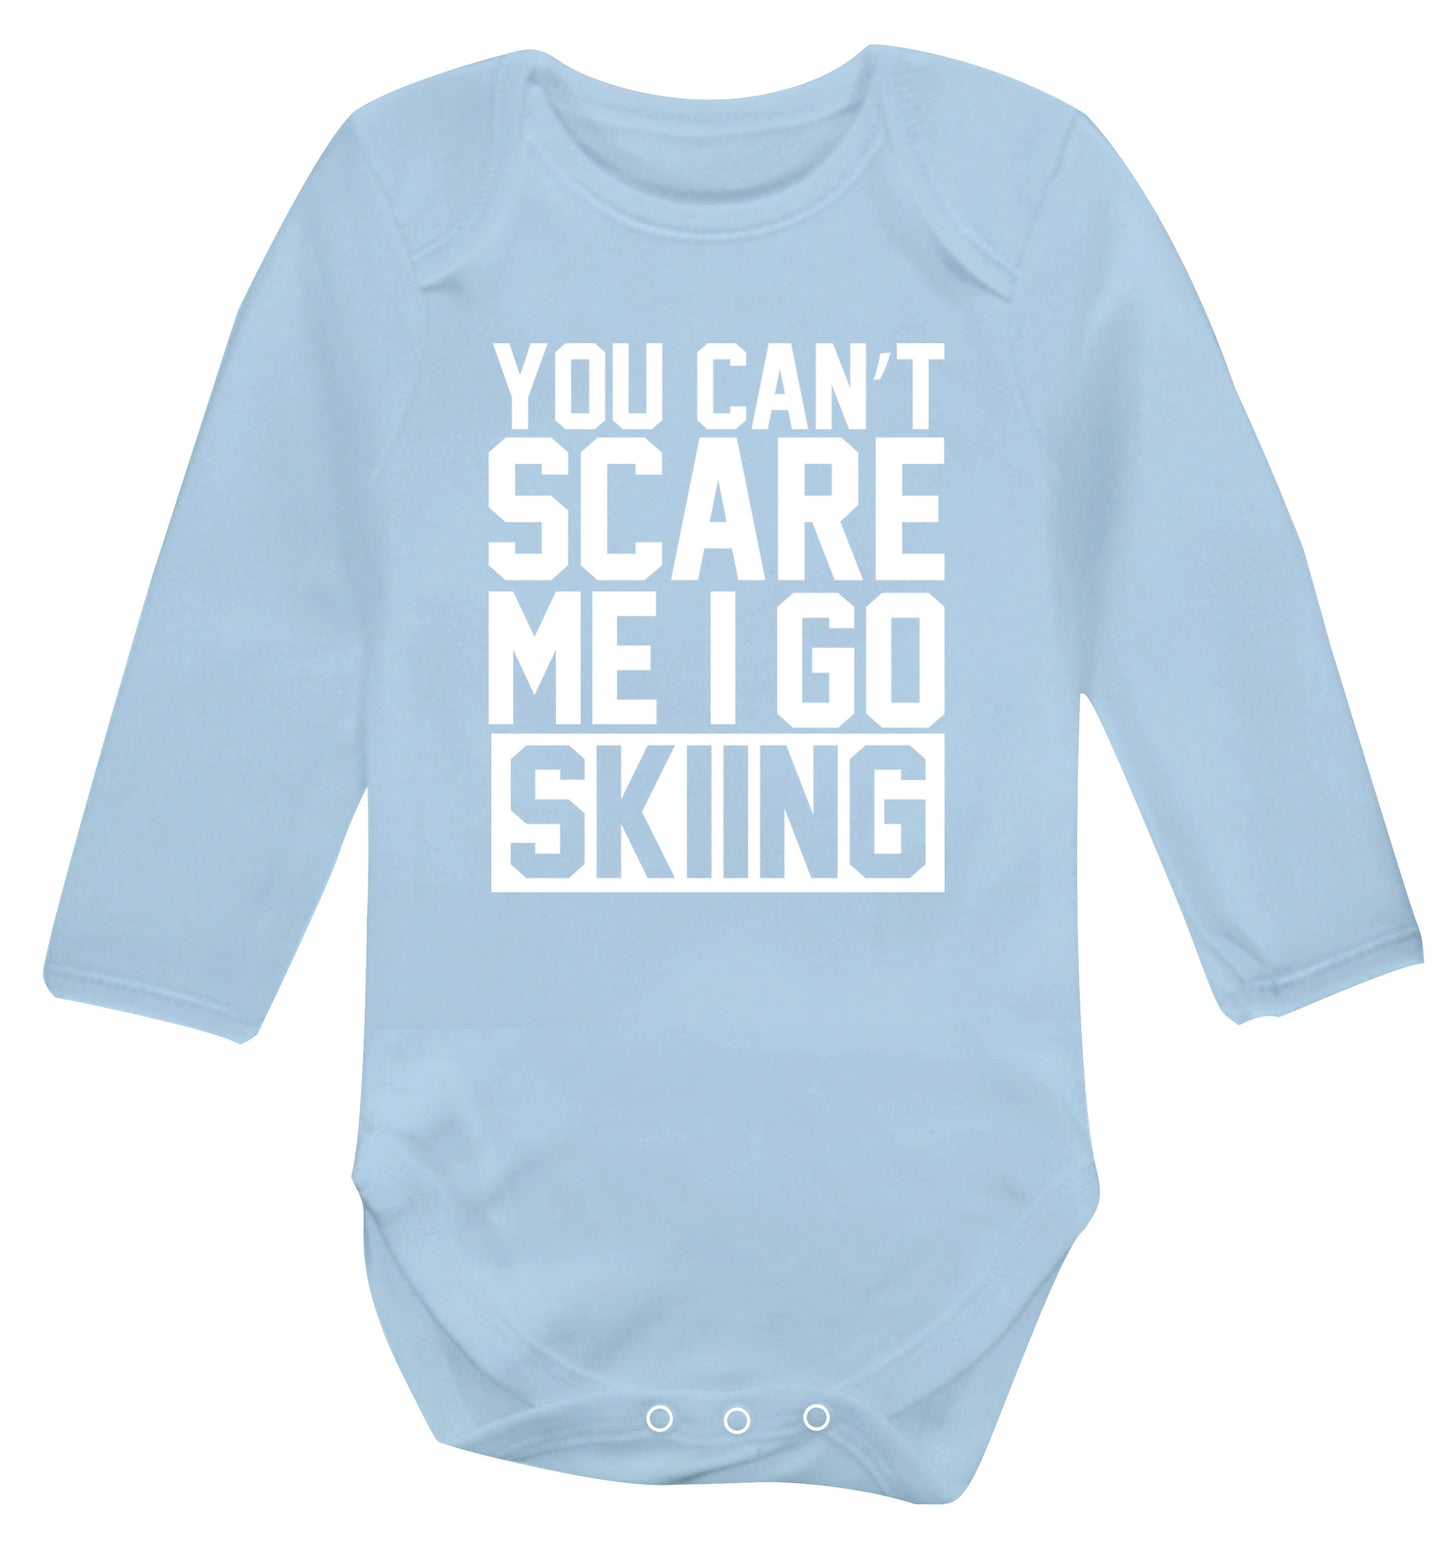 You can't scare me I go skiing Baby Vest long sleeved pale blue 6-12 months